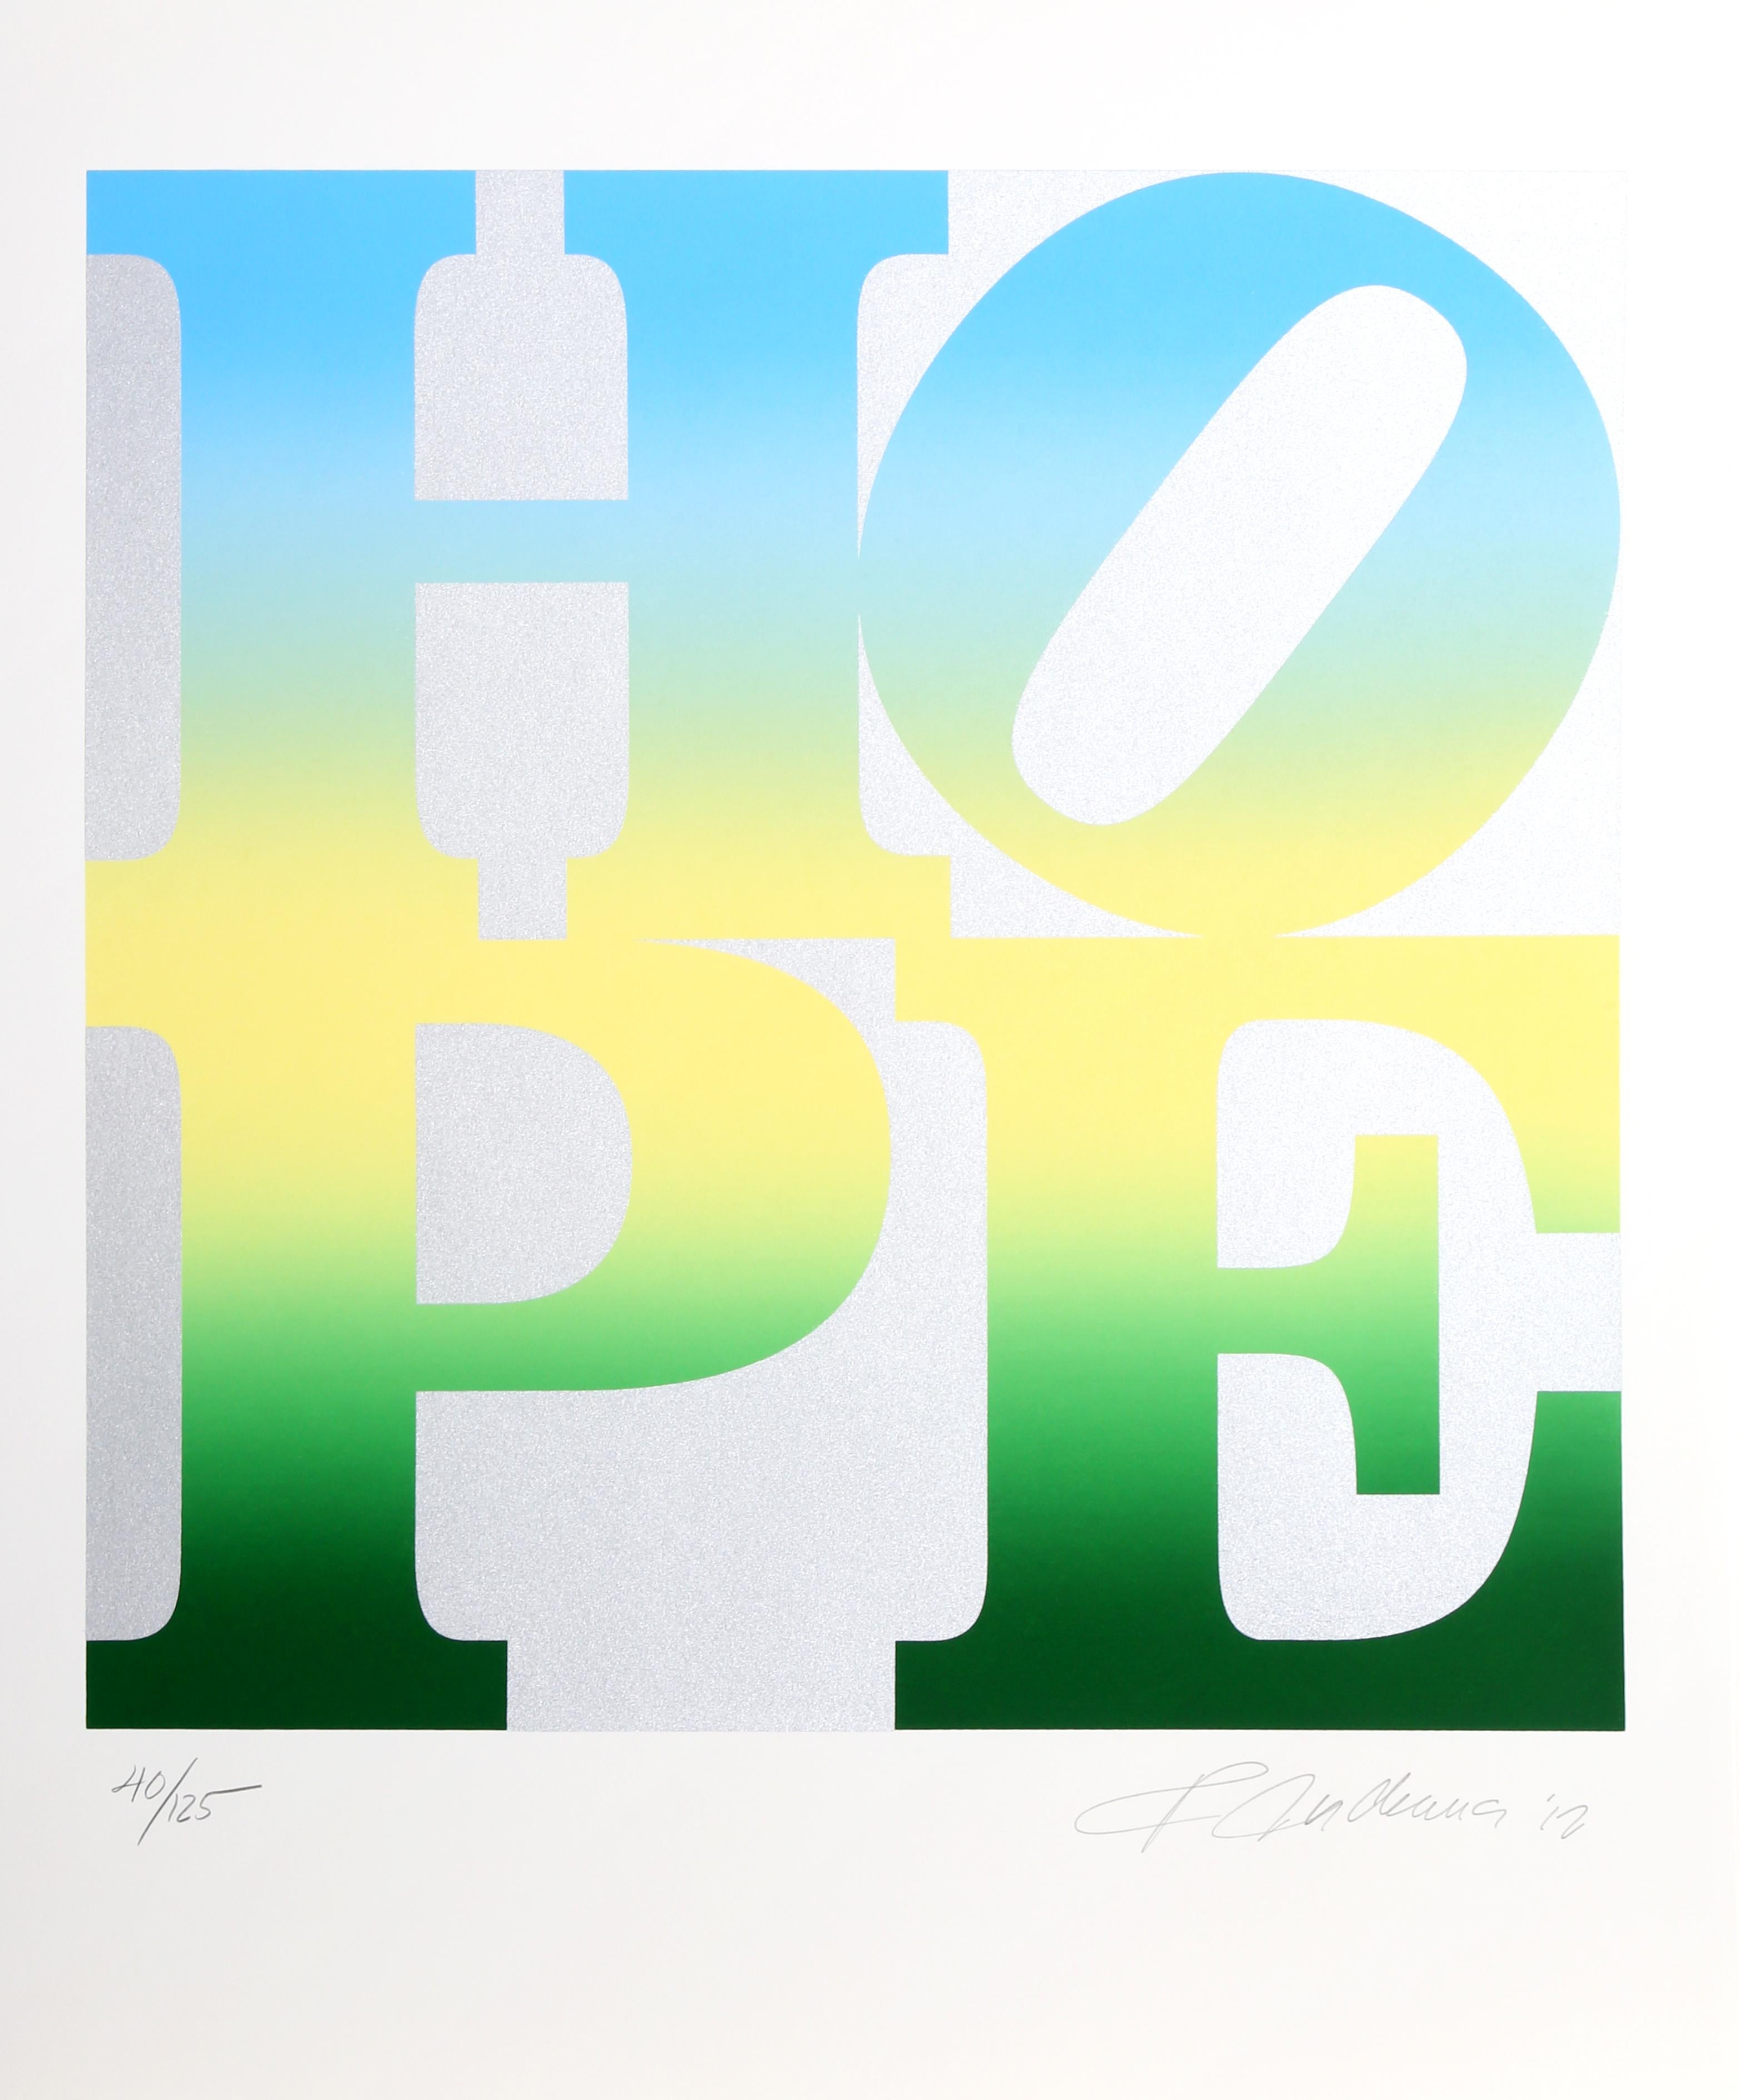 From the artist that gave us LOVE, he now gives us HOPE.  This is the complete suite of four HOPE silkscreens on Silver in the original folio. Each print is signed and numbered in pencil. 

Artist: Robert Indiana, American (1928 - 2018)
Title: Four